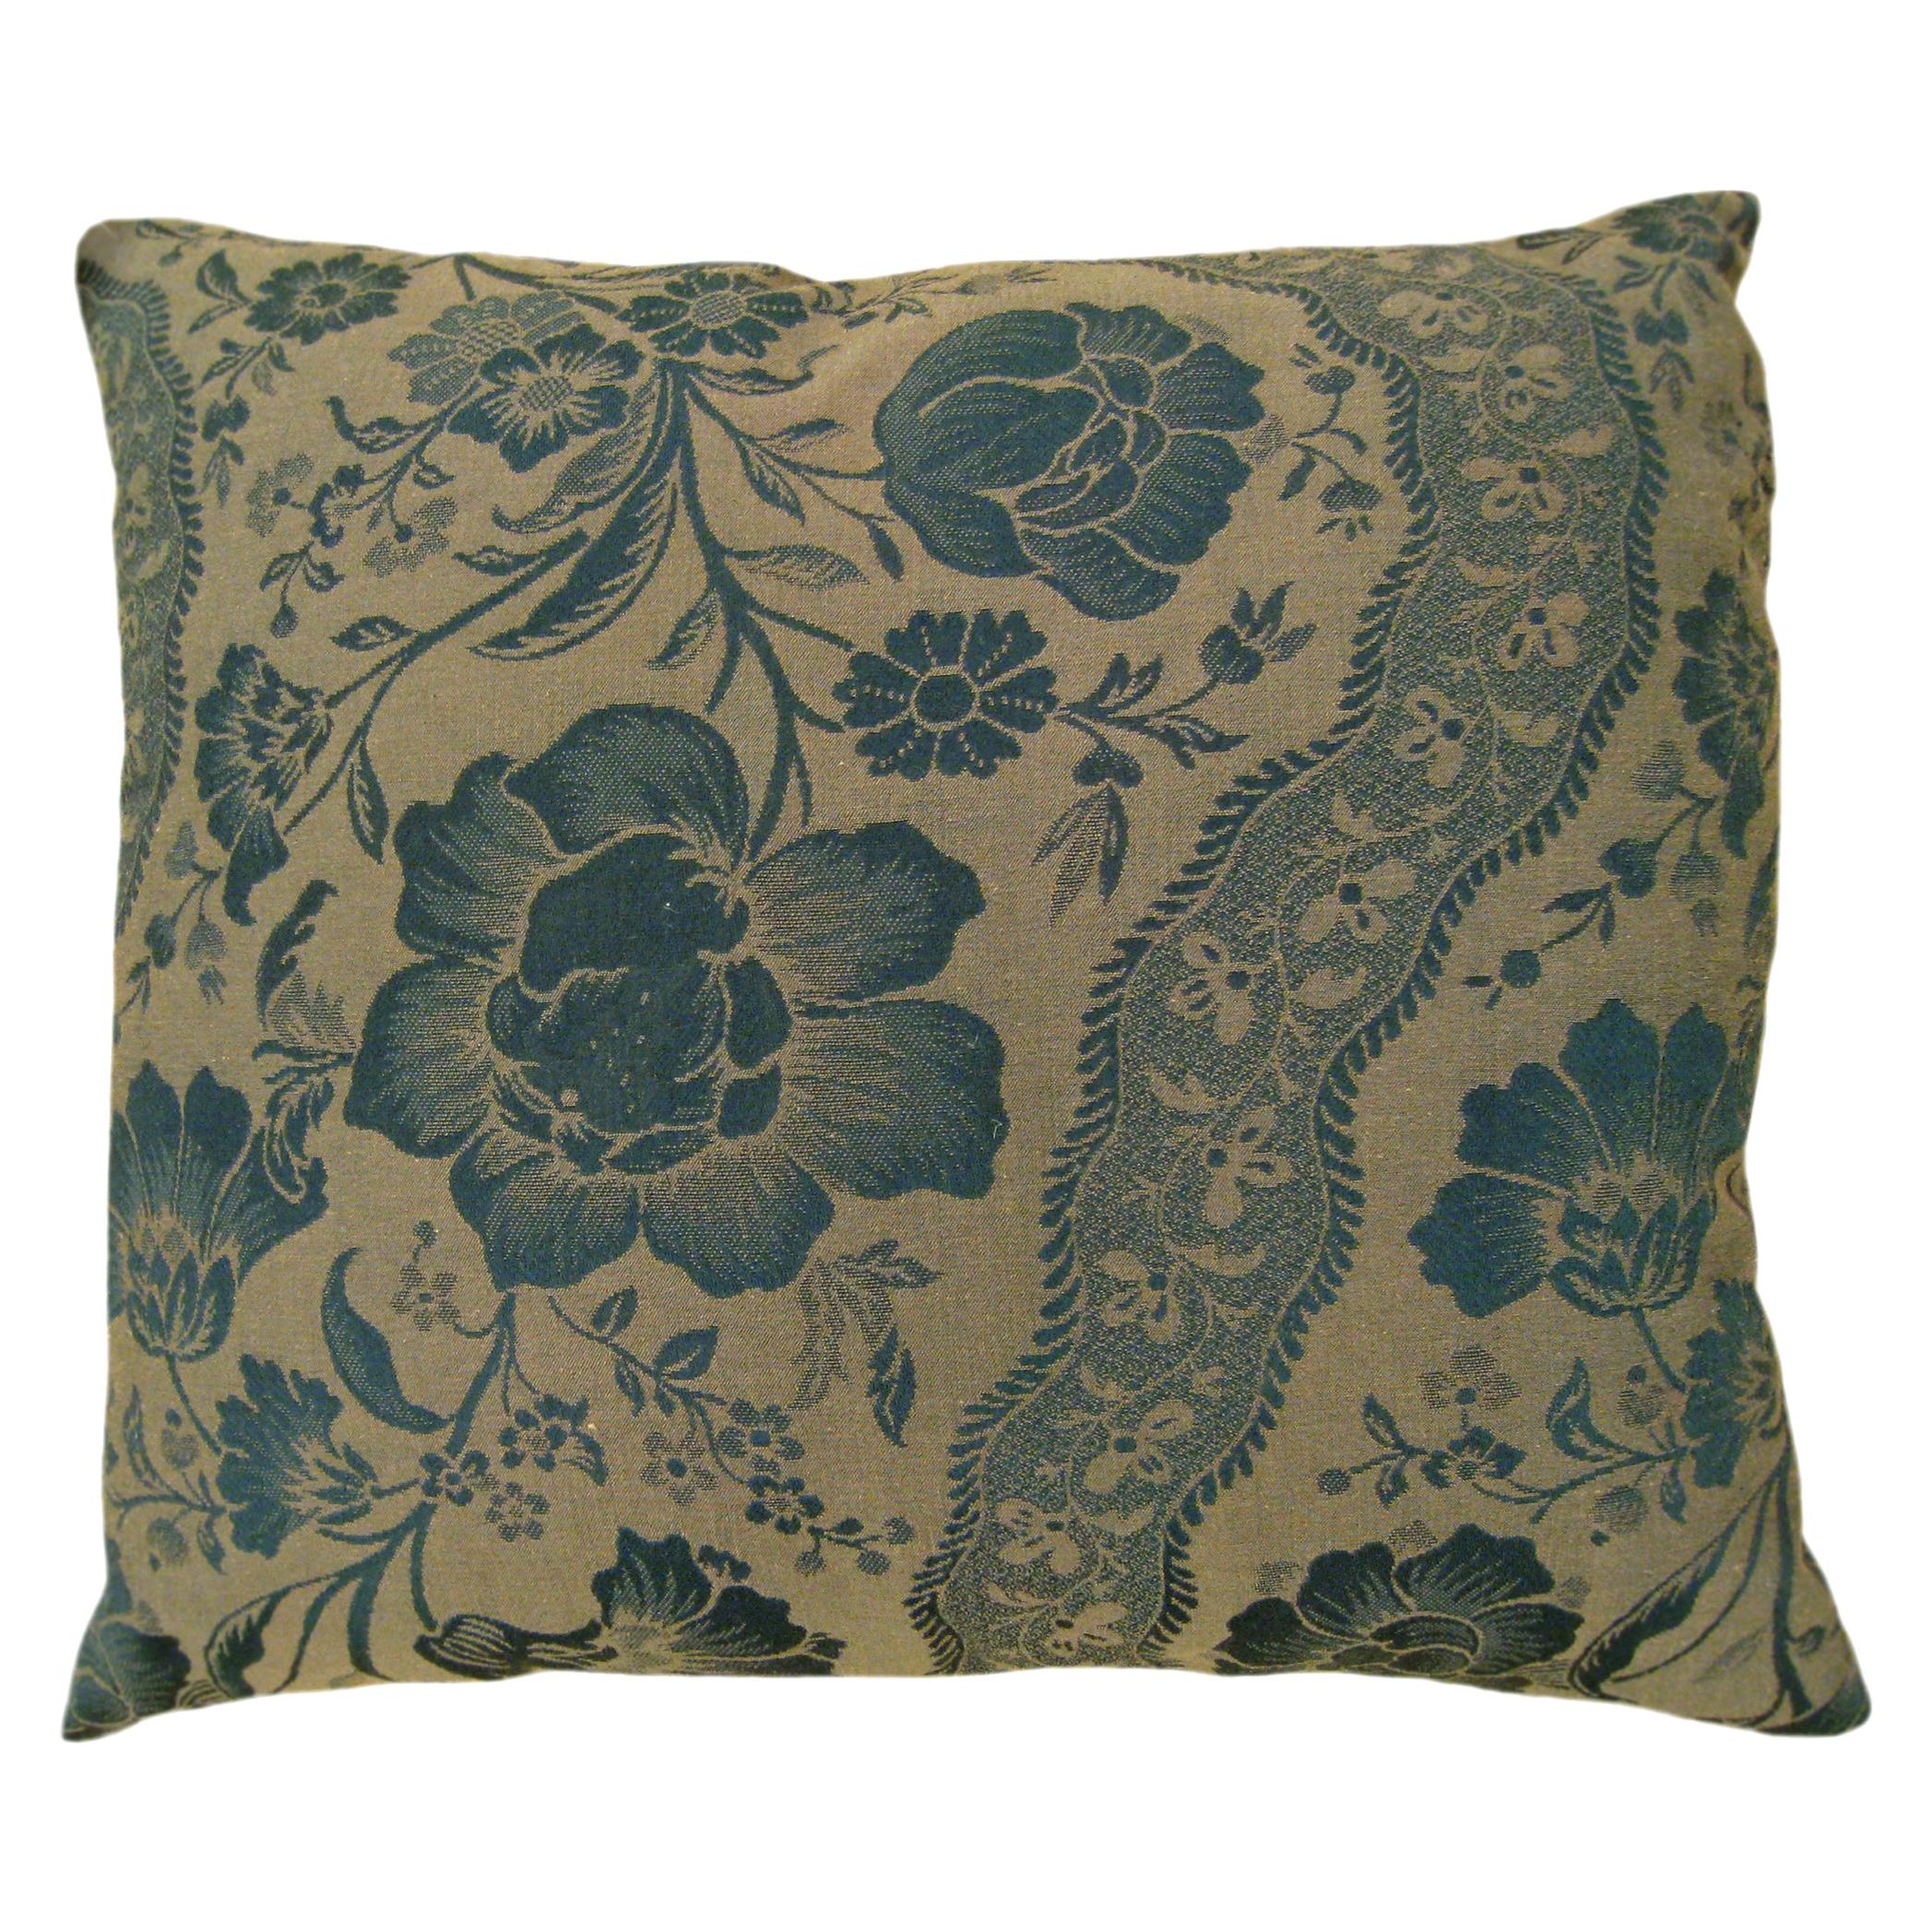 Vintage Decorative Pillow with Directional Floral Pattern For Sale